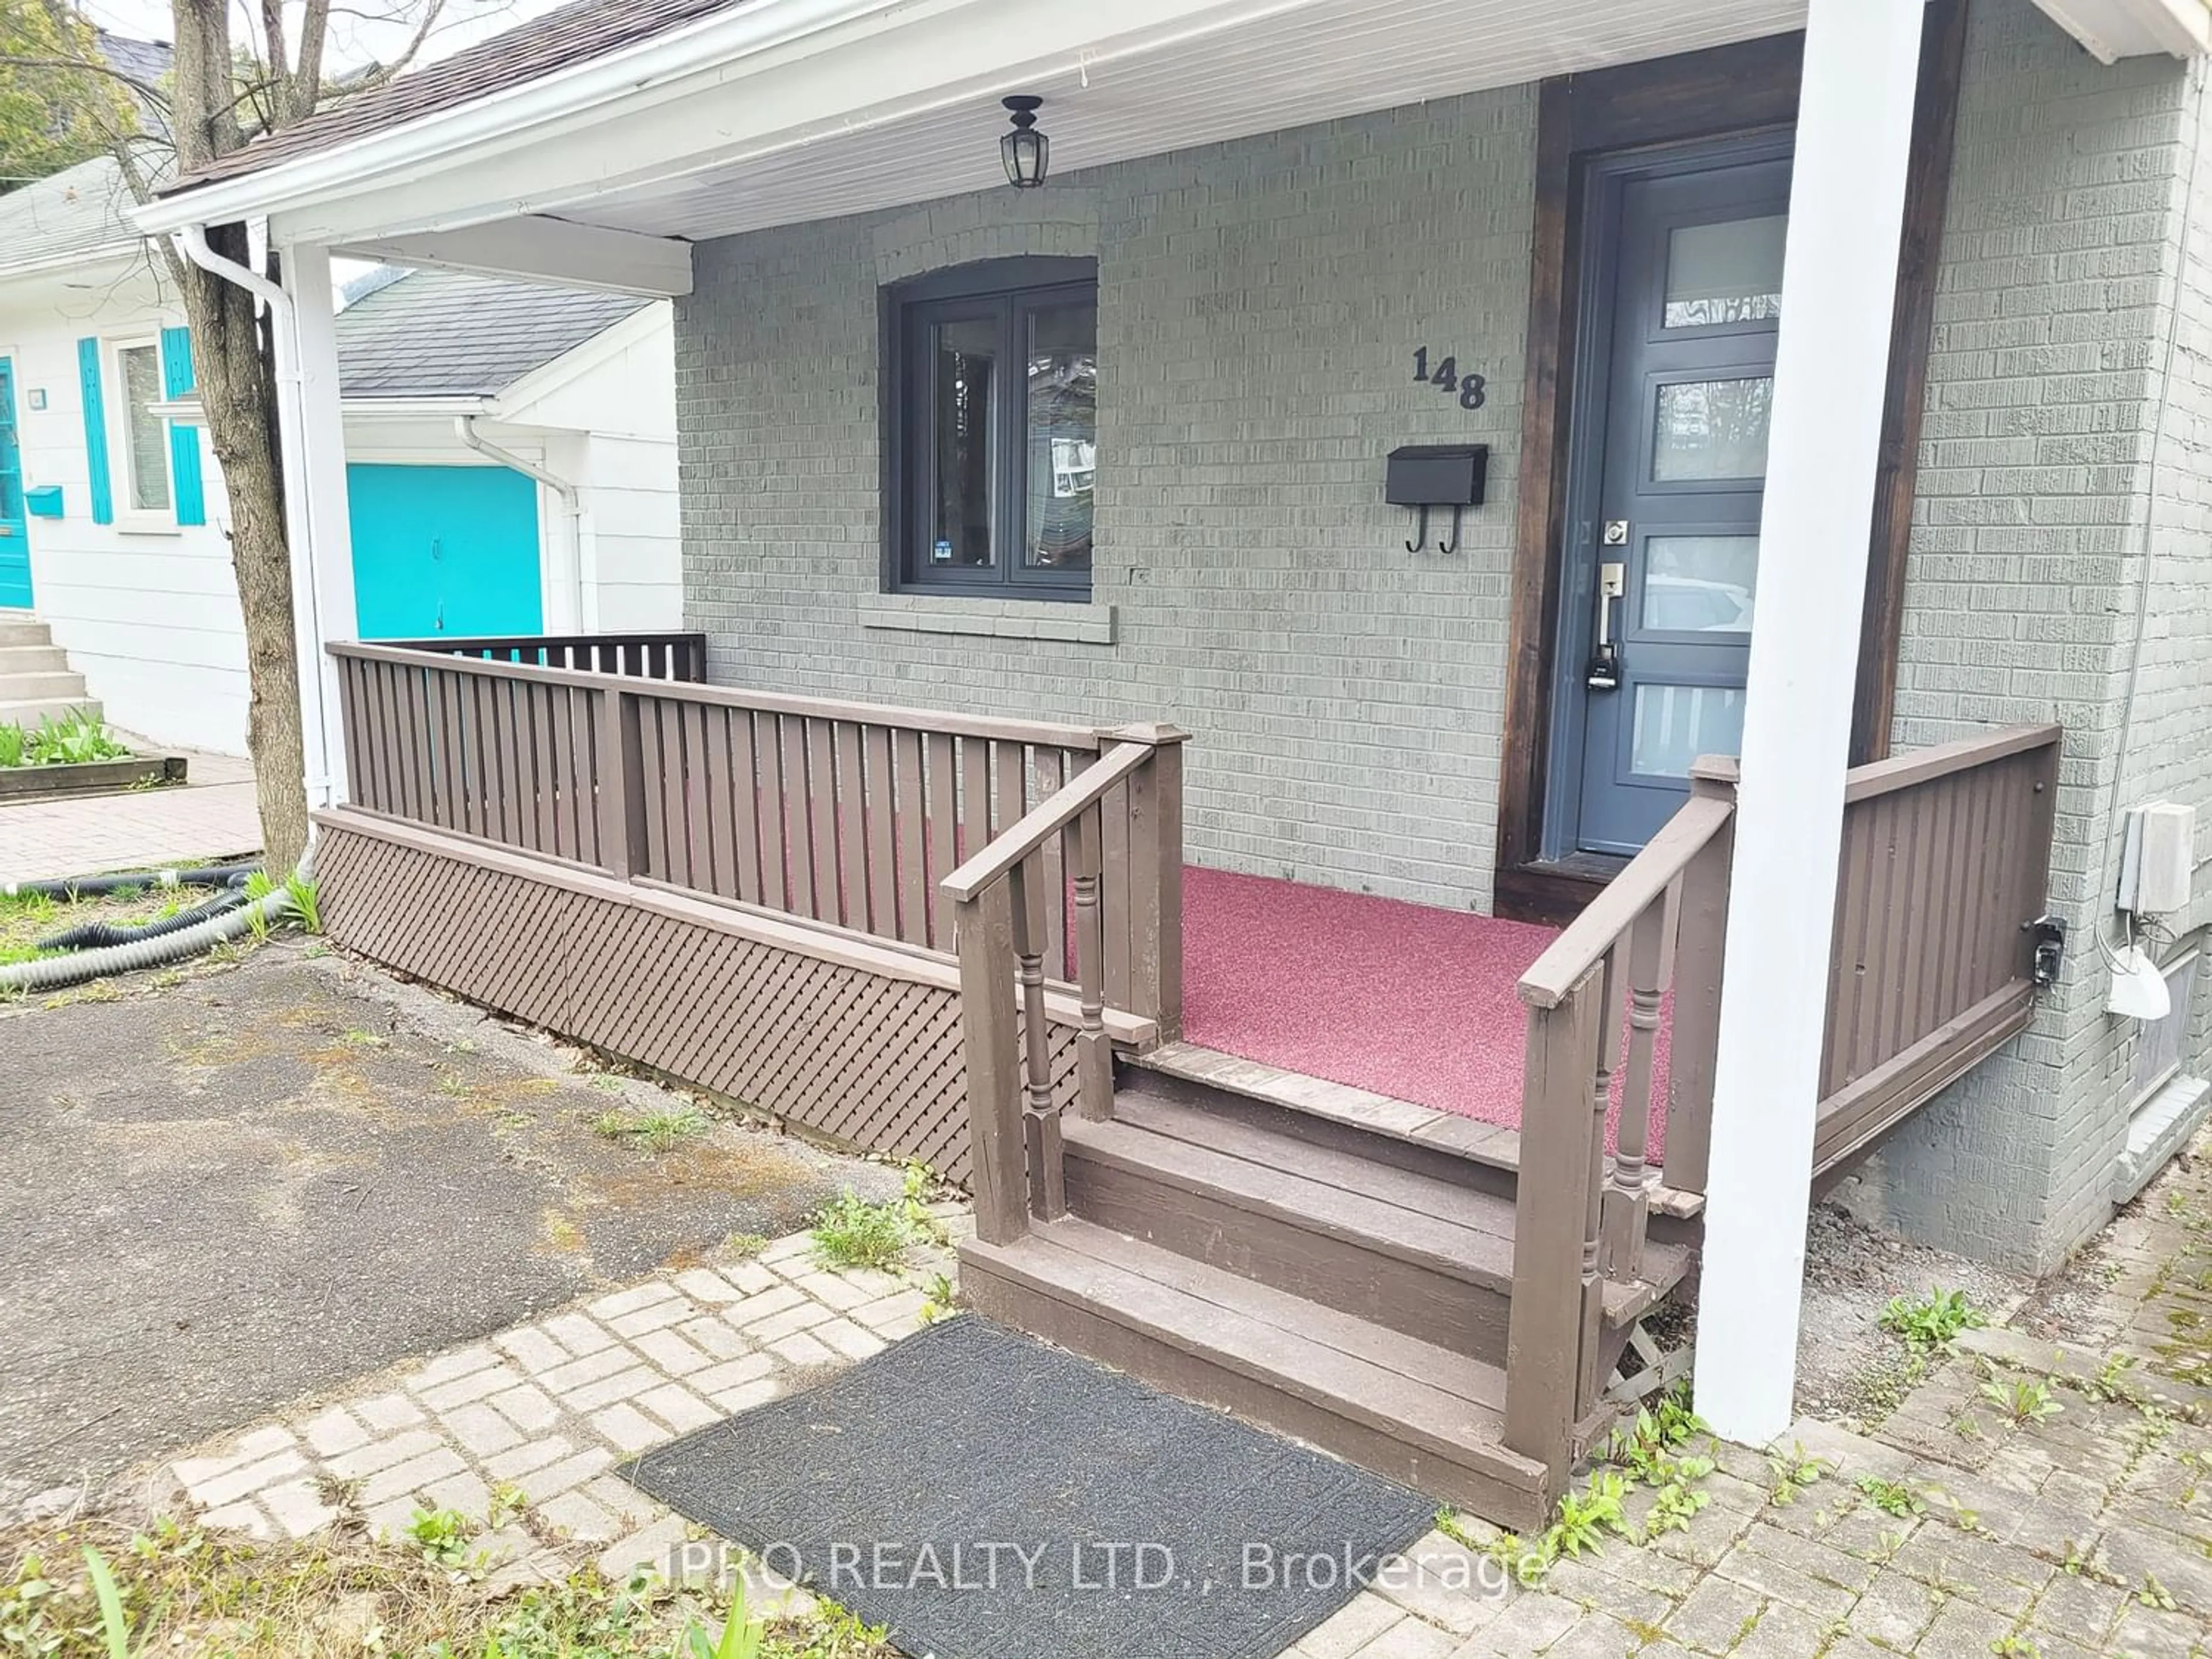 Outside view for 148 Richmond St, Richmond Hill Ontario L4C 3Y4